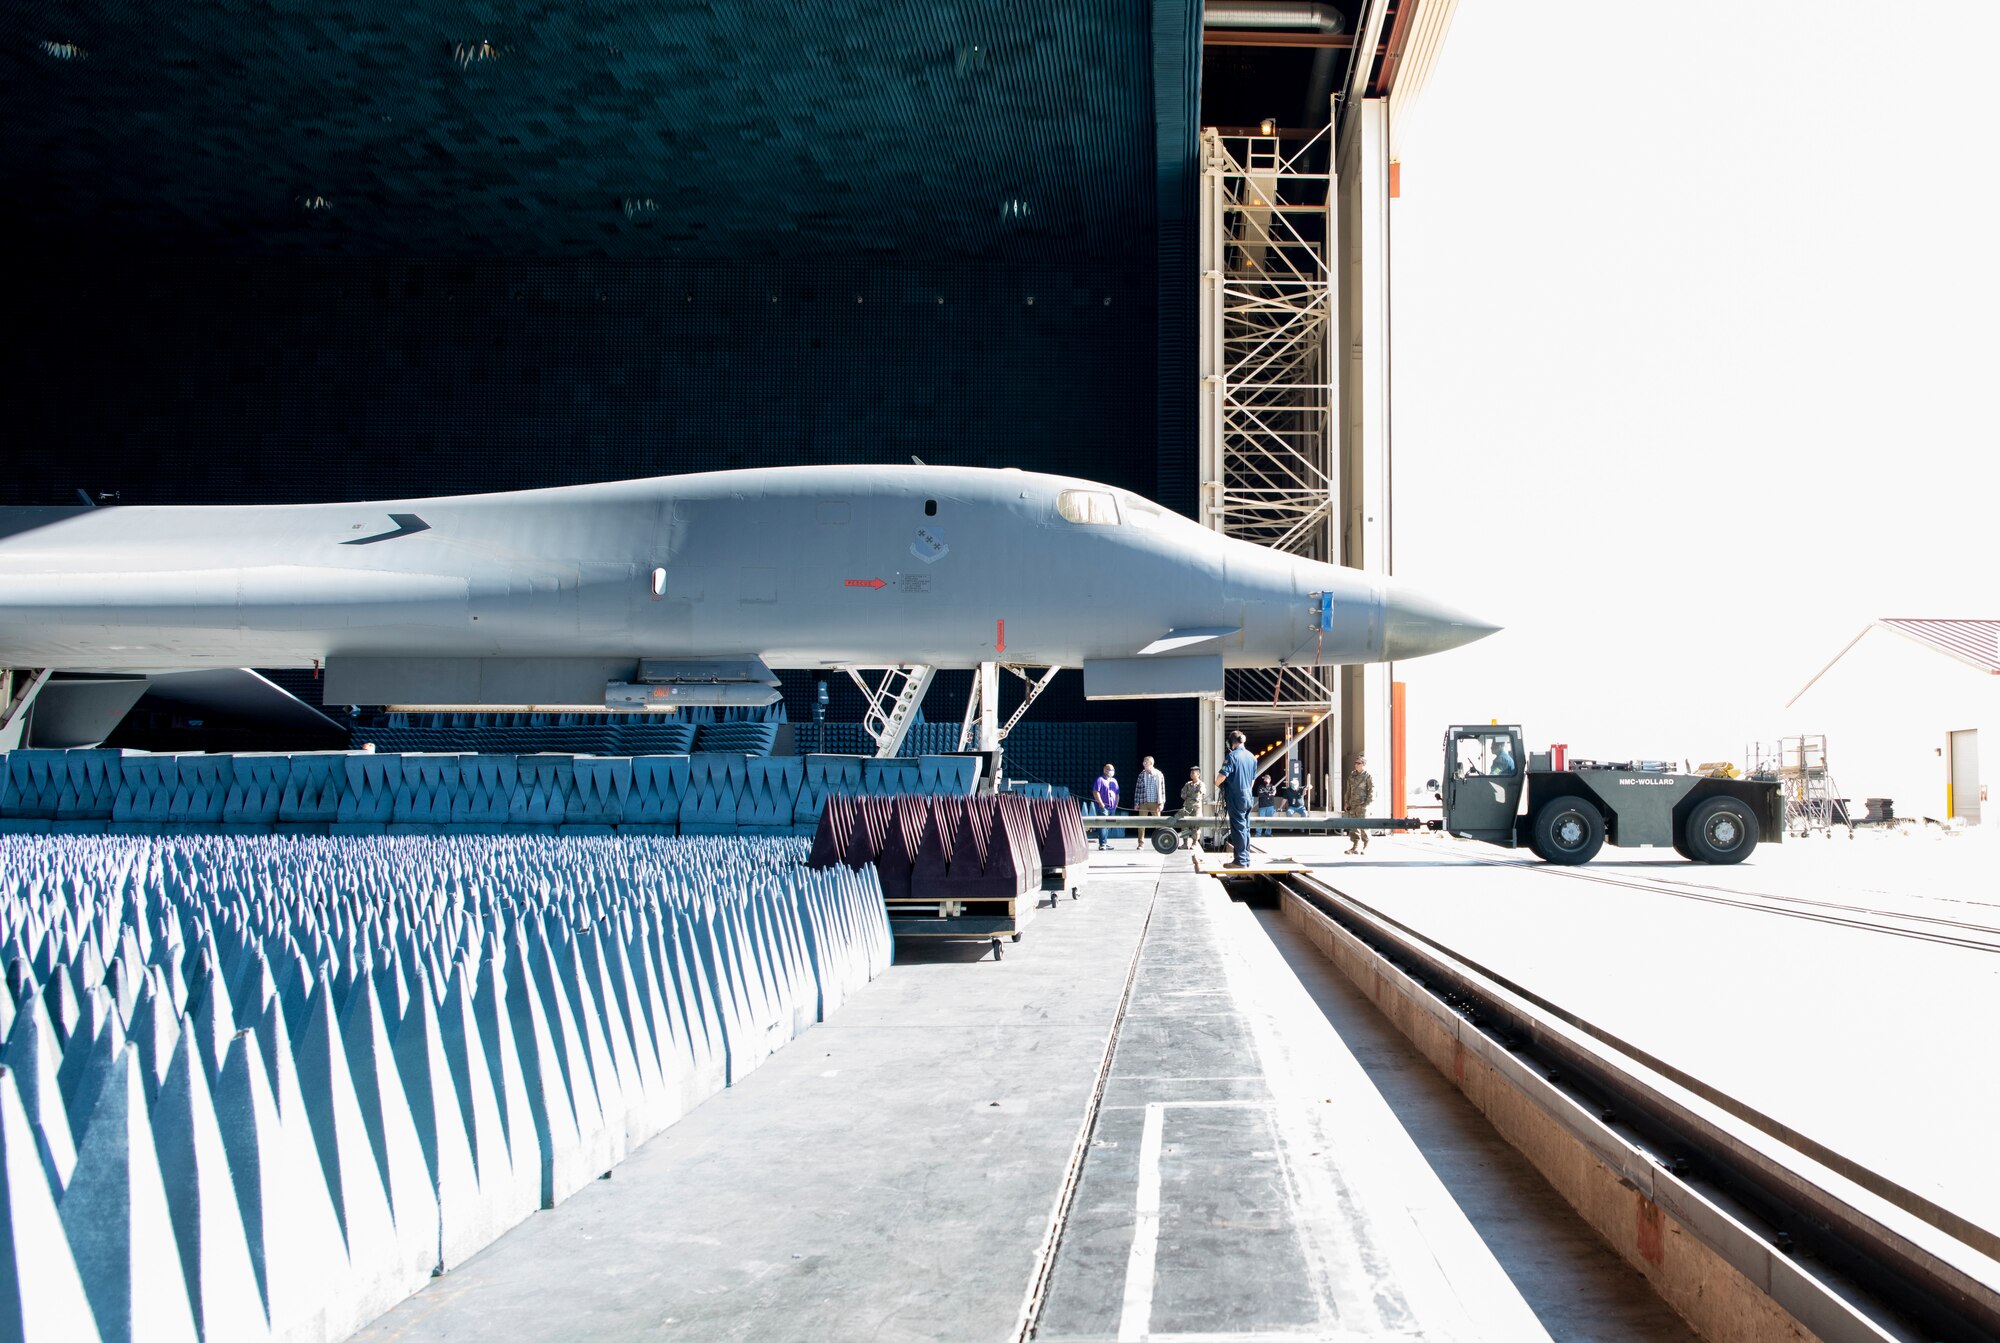 Ground crews move a B-1B Lancer into position at the Benefield Anechoic Facility on Edwards Air Force Base, California, May 20. The Lancer, from the 337th Test and Evaluation Squadron, 53rd Wing, out of Dyess Air Force Base, Texas, will be used to conduct testing of PFS 6.42. (Air Force photo by 1st Lt. Christine Saunders)